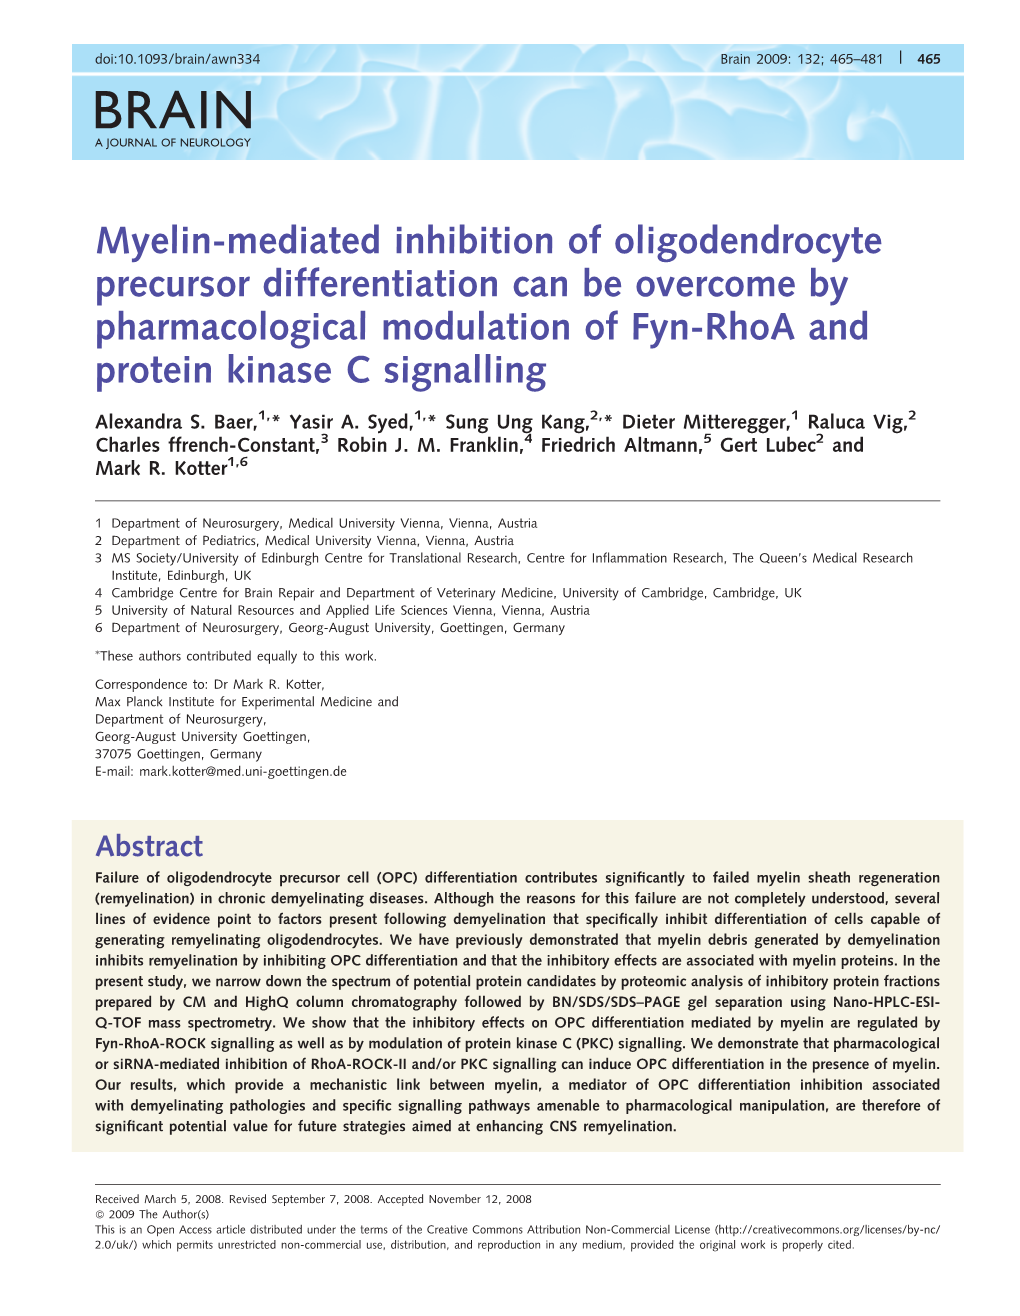 Myelin-Mediated Inhibition of Oligodendrocyte Precursor Differentiation Can Be Overcome by Pharmacological Modulation of Fyn-Rhoa and Protein Kinase C Signalling